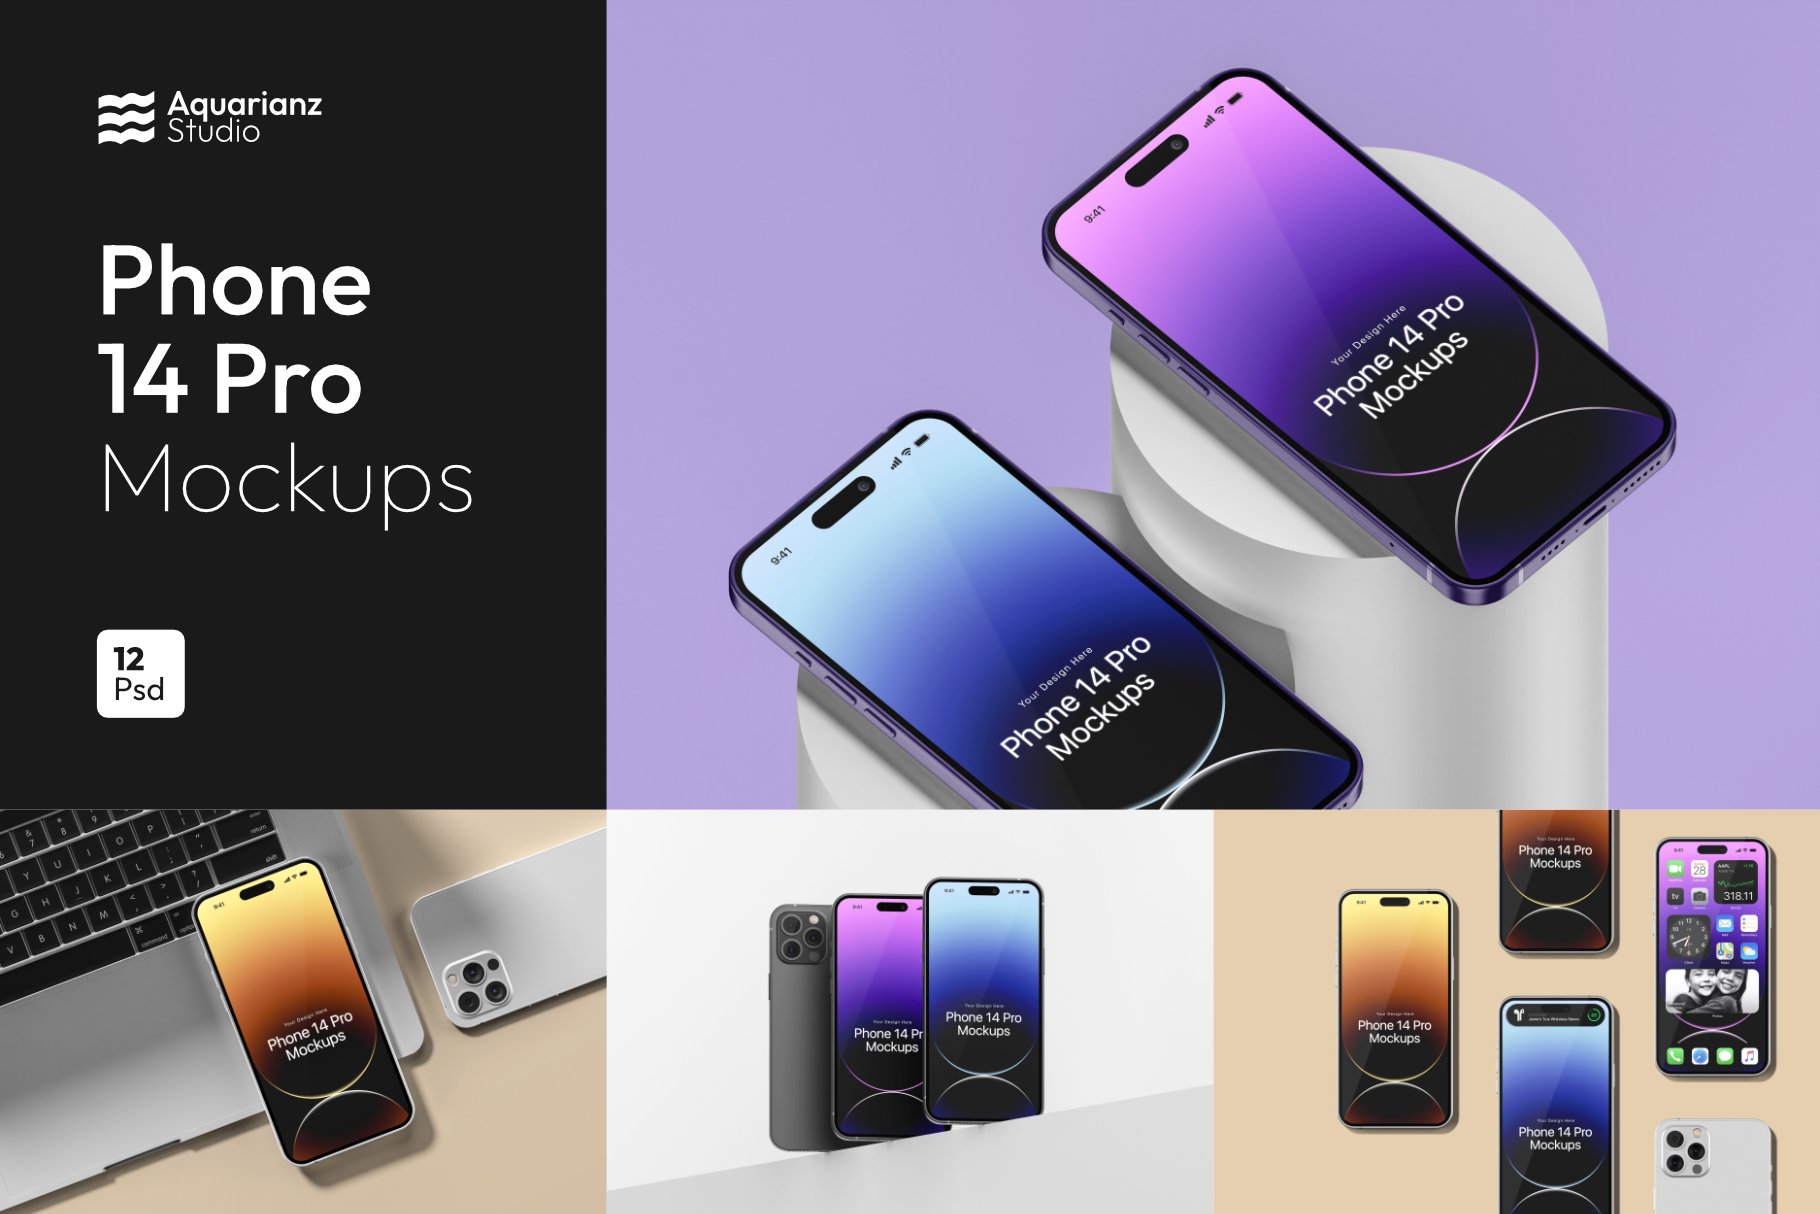 Phone 14 Pro Mockups cover image.